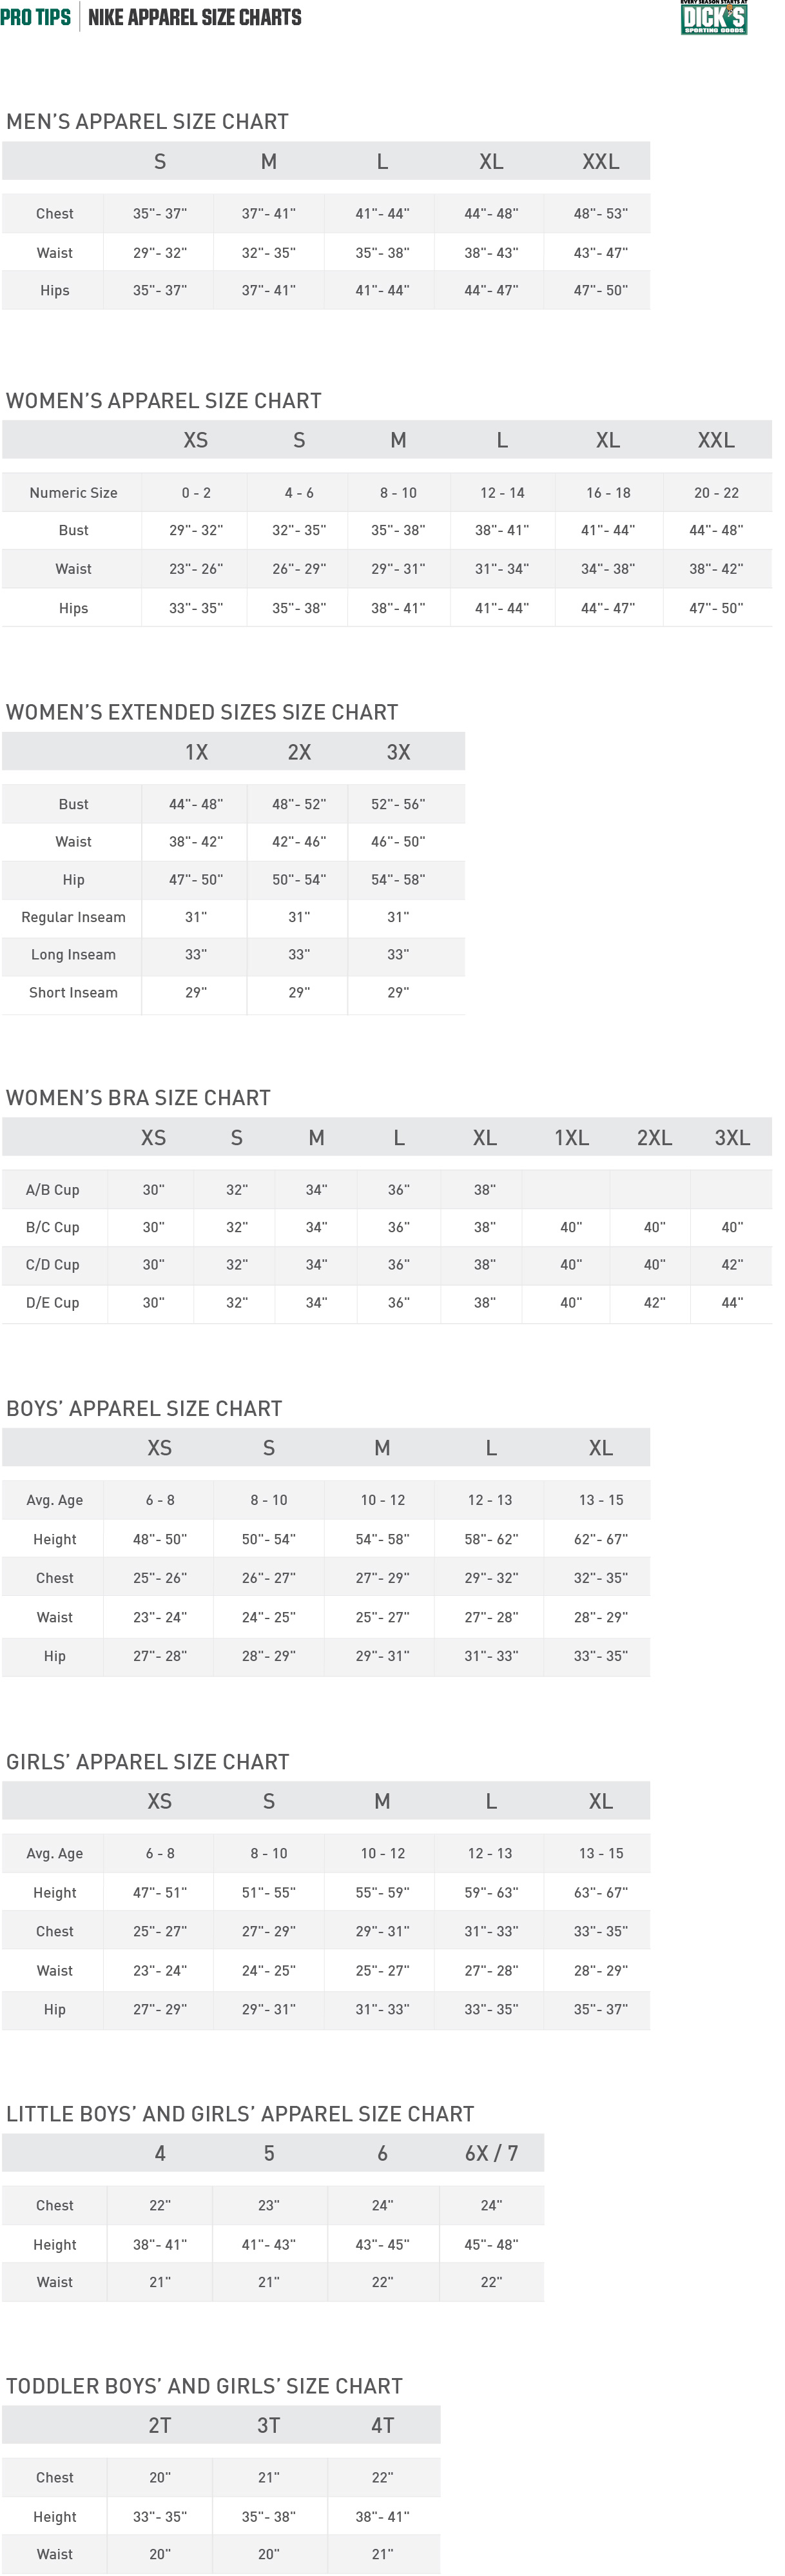 Nike® Apparel Size Charts | PRO TIPS by 